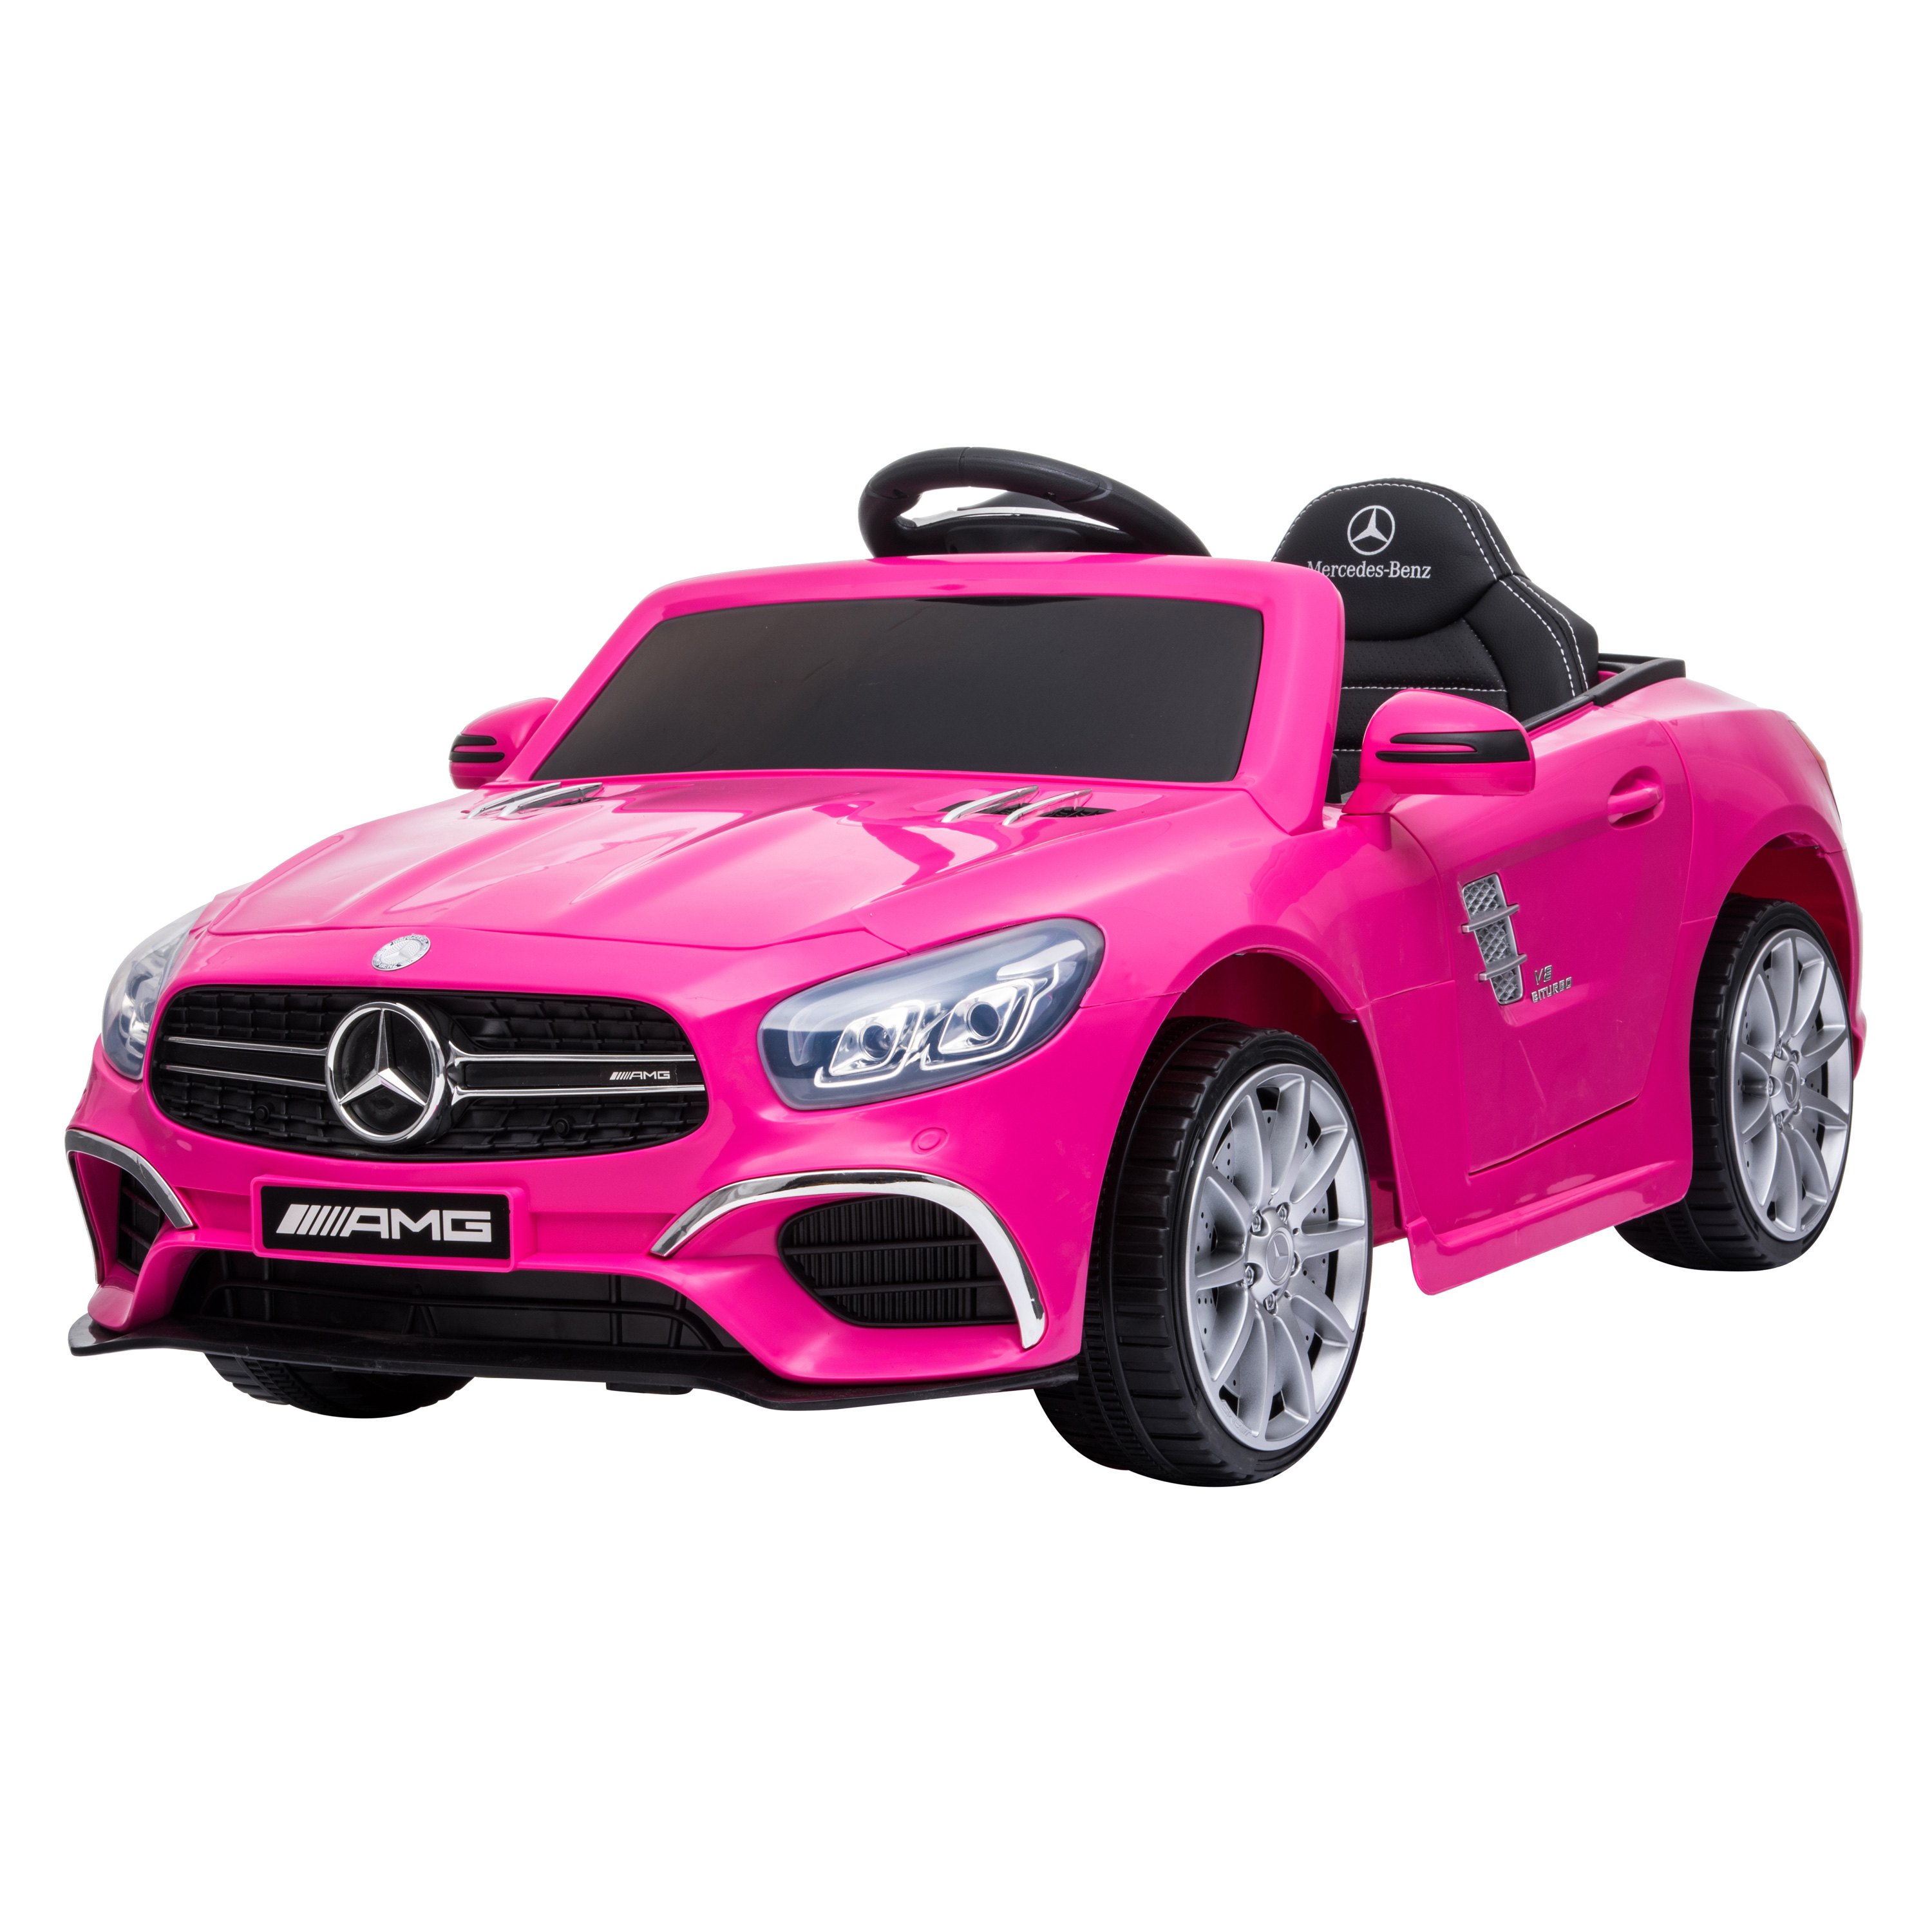 pink ride on car